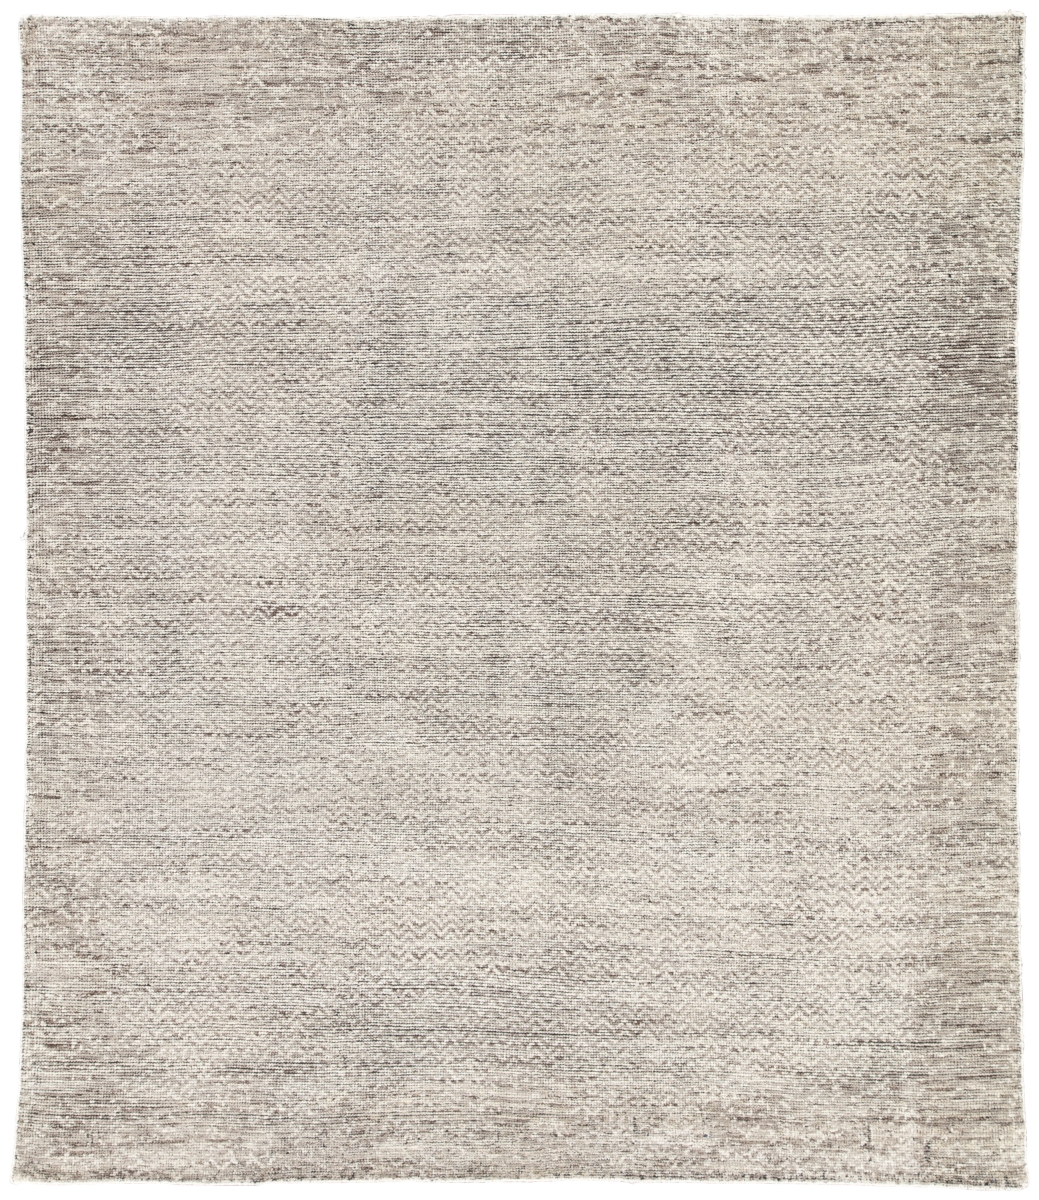 Rug138511 9 X 12 Ft. Rize Shervin Hand-knotted Chevron Dark Gray & Ivory Area Rug